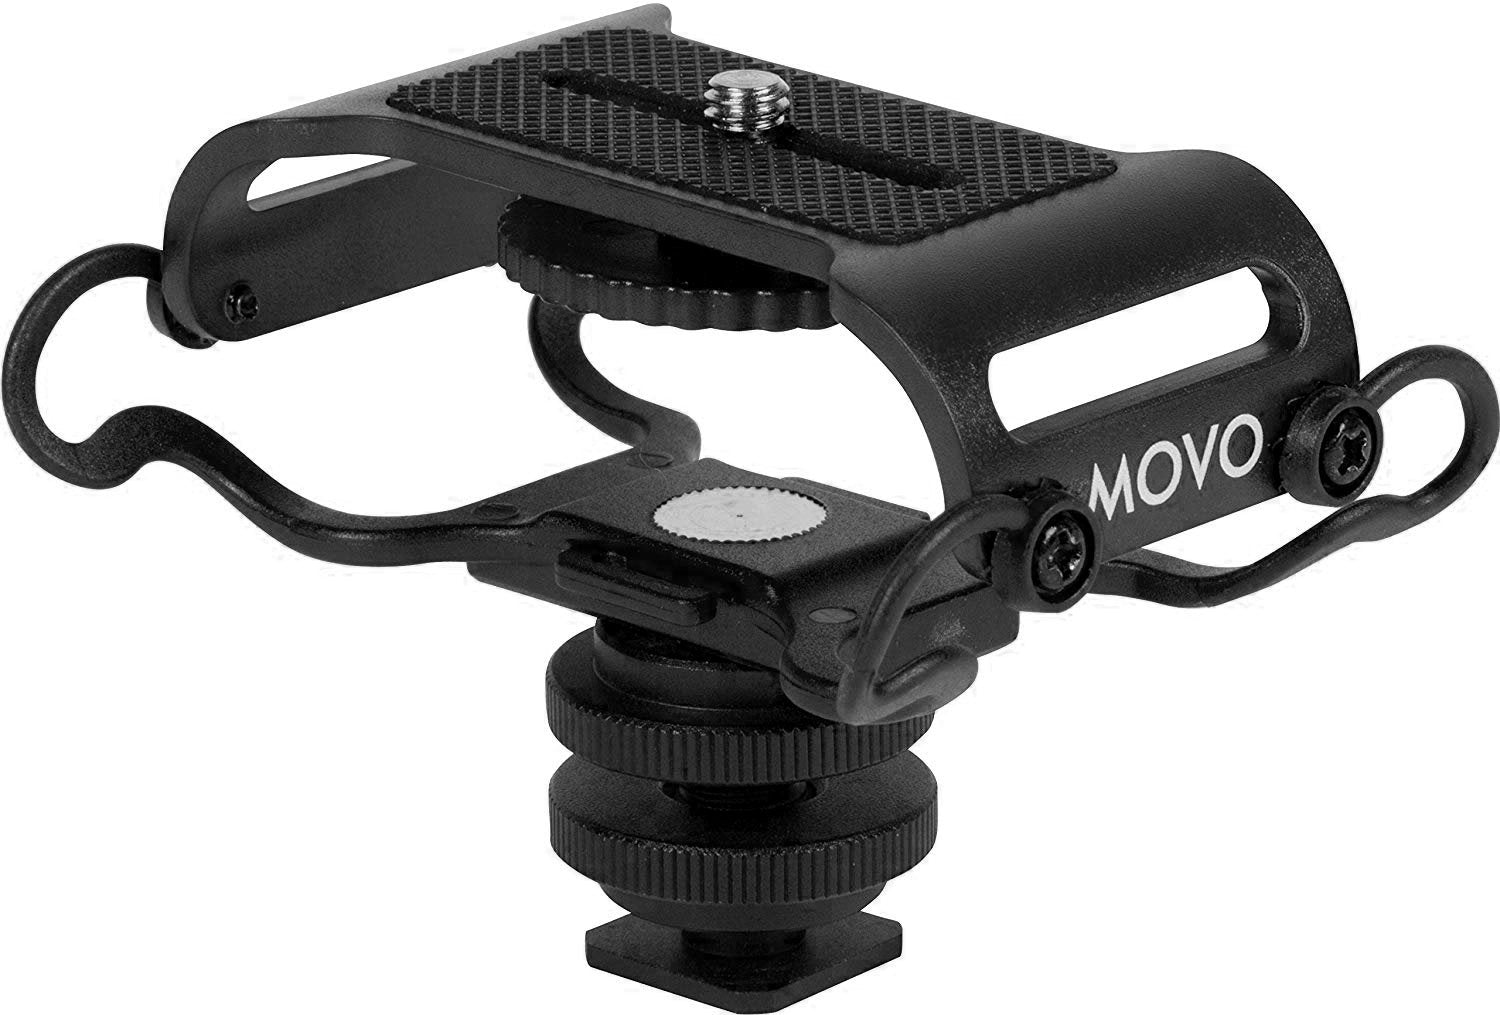 Movo SMM5-B Universal Microphone and Portable Recorder Shock Mount - Fits the Zoom H1n, H2n, H4n, H5, H6, Tascam DR-40x, DR-05x, DR-07x and others with a 1/4" Mounting Screw (Black)  - Like New